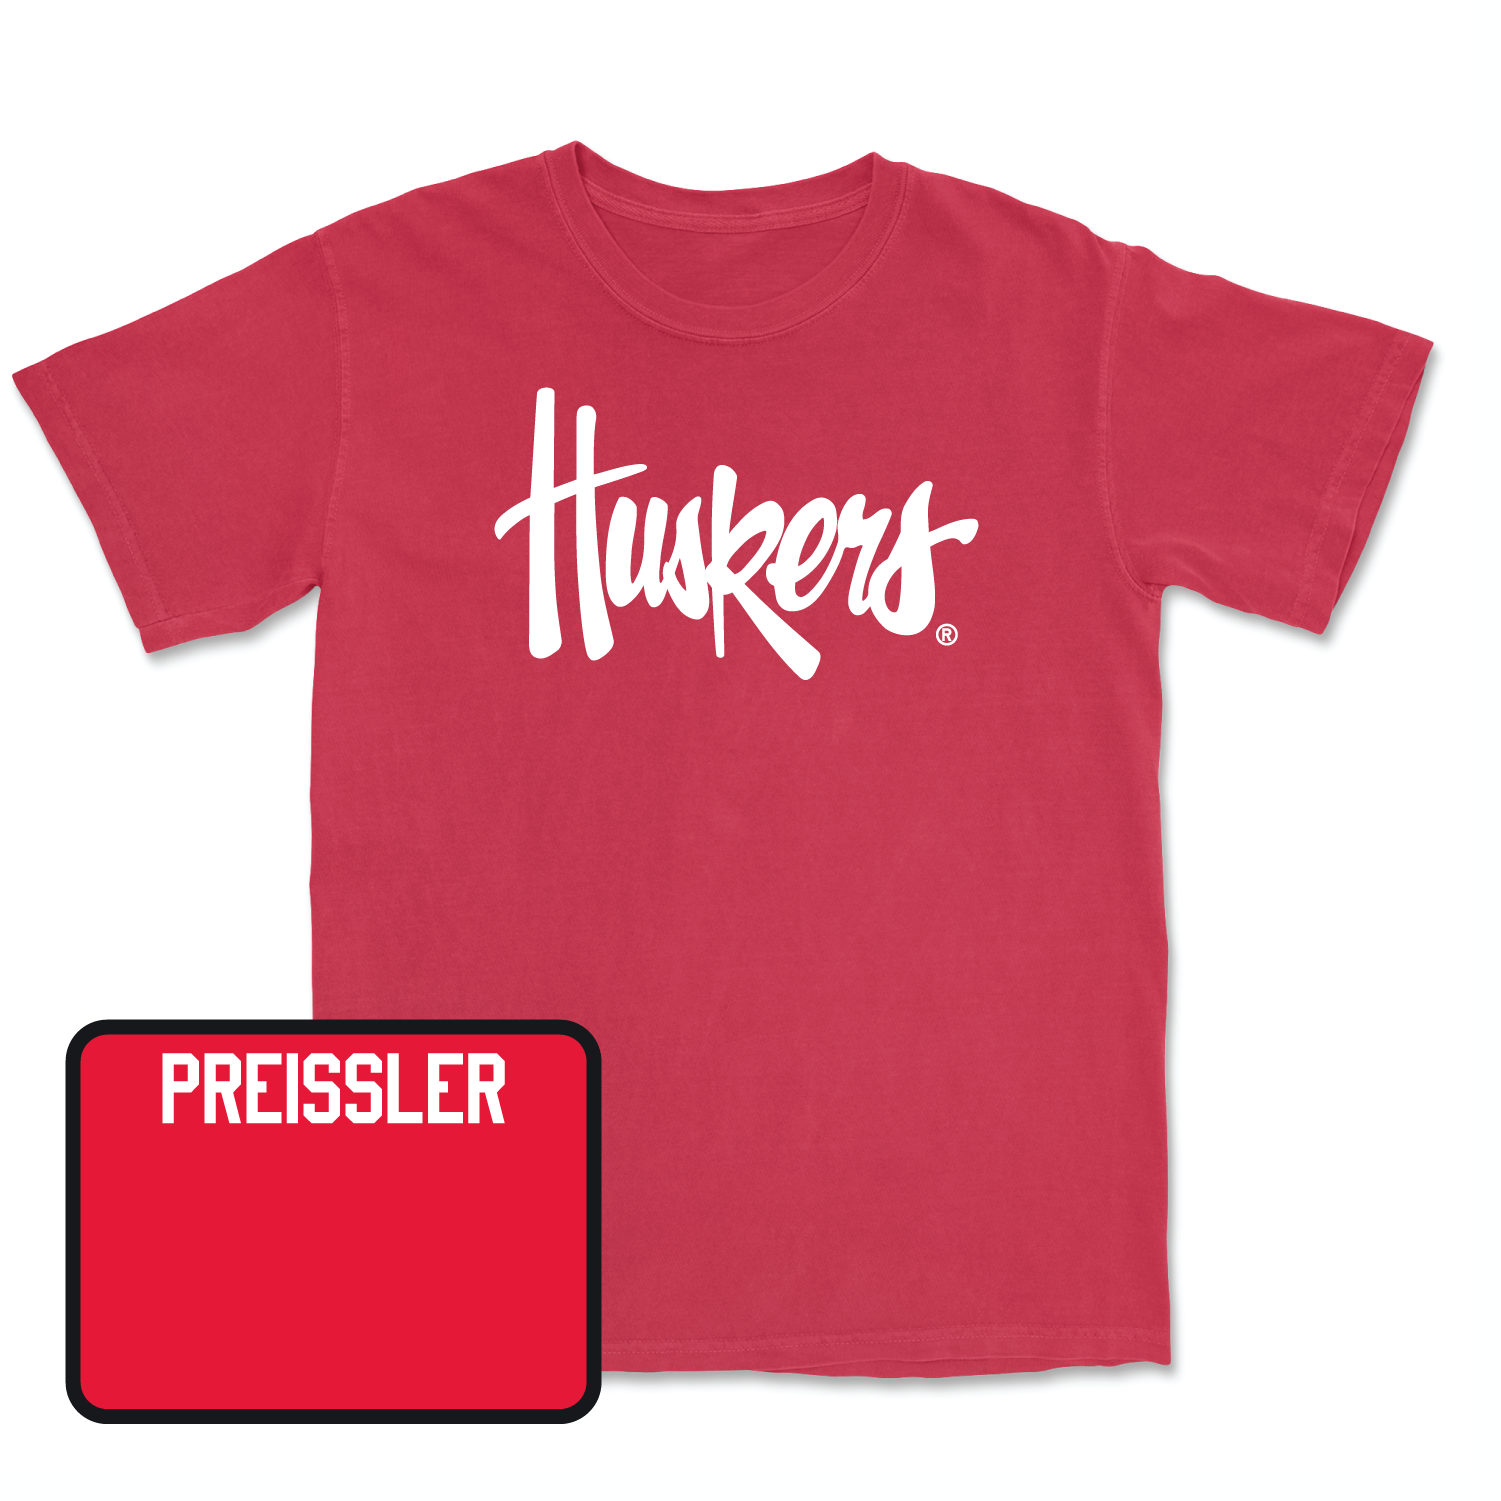 Red Track & Field Huskers Tee X-Large / Hannah Preissler